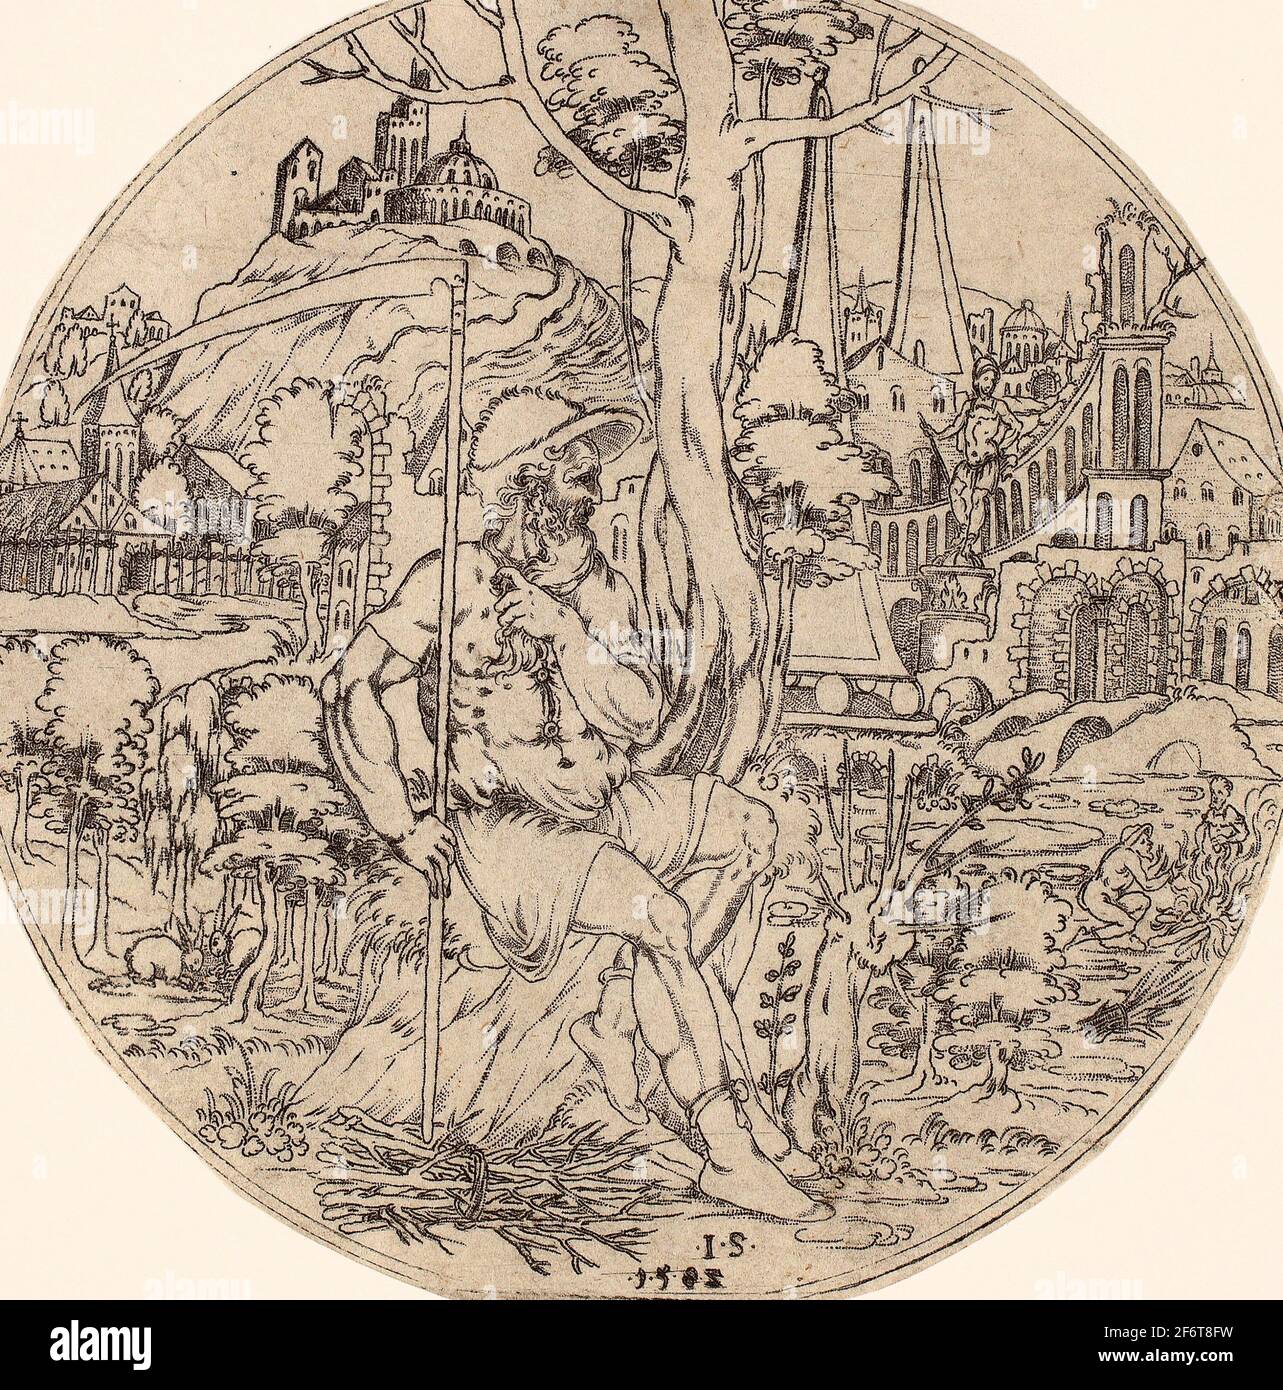 Author: Jonas Silber, (Master J.S.). Circular Design with Saturn - 1583 - Jonas Silber (Master J.S.) German, active 1572-1590. Punched engraving on Stock Photo